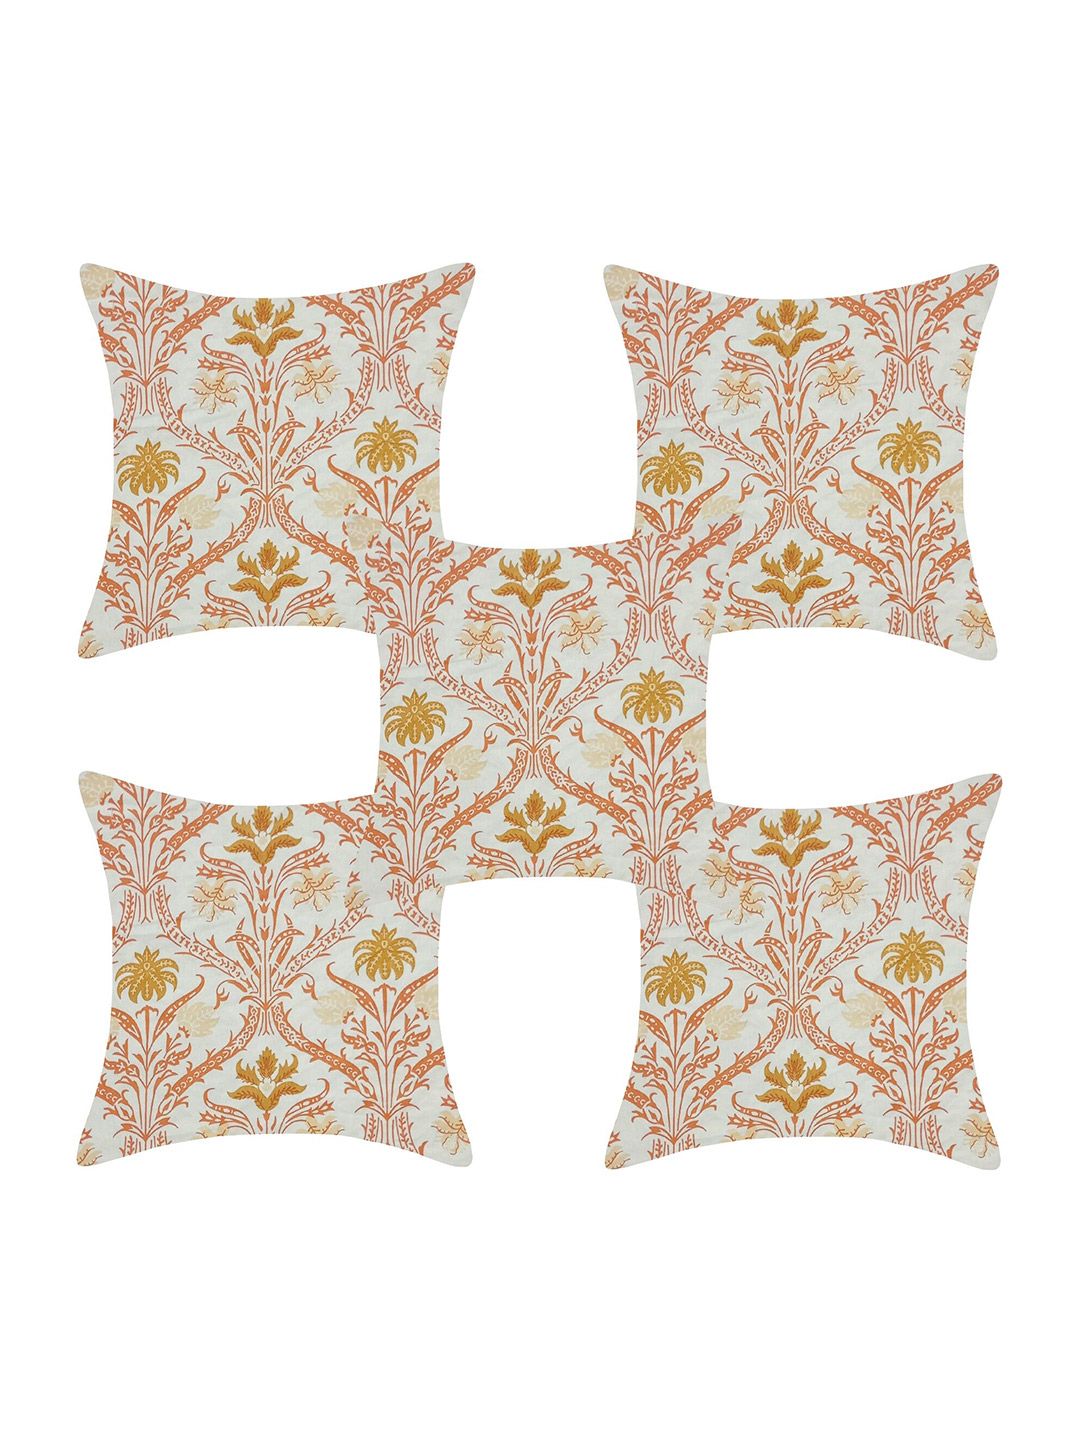 INDHOME LIFE White & Orange Set of 5 Abstract Square Cushion Covers-16x16 Inches Price in India